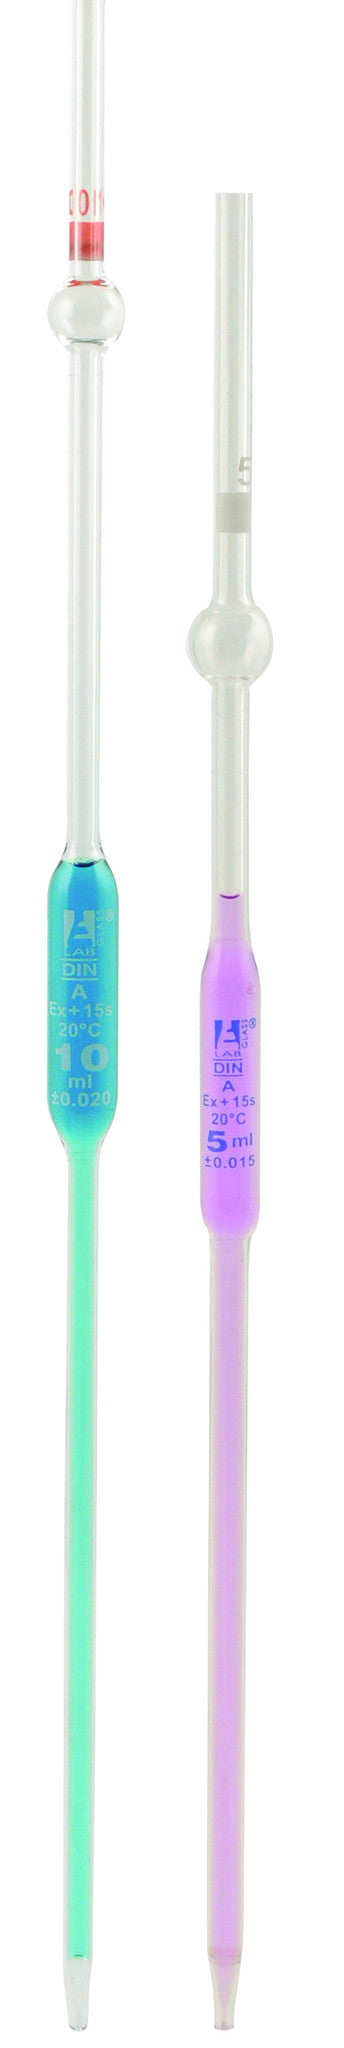 Pipette class 'B' with safety bulb, 1ml